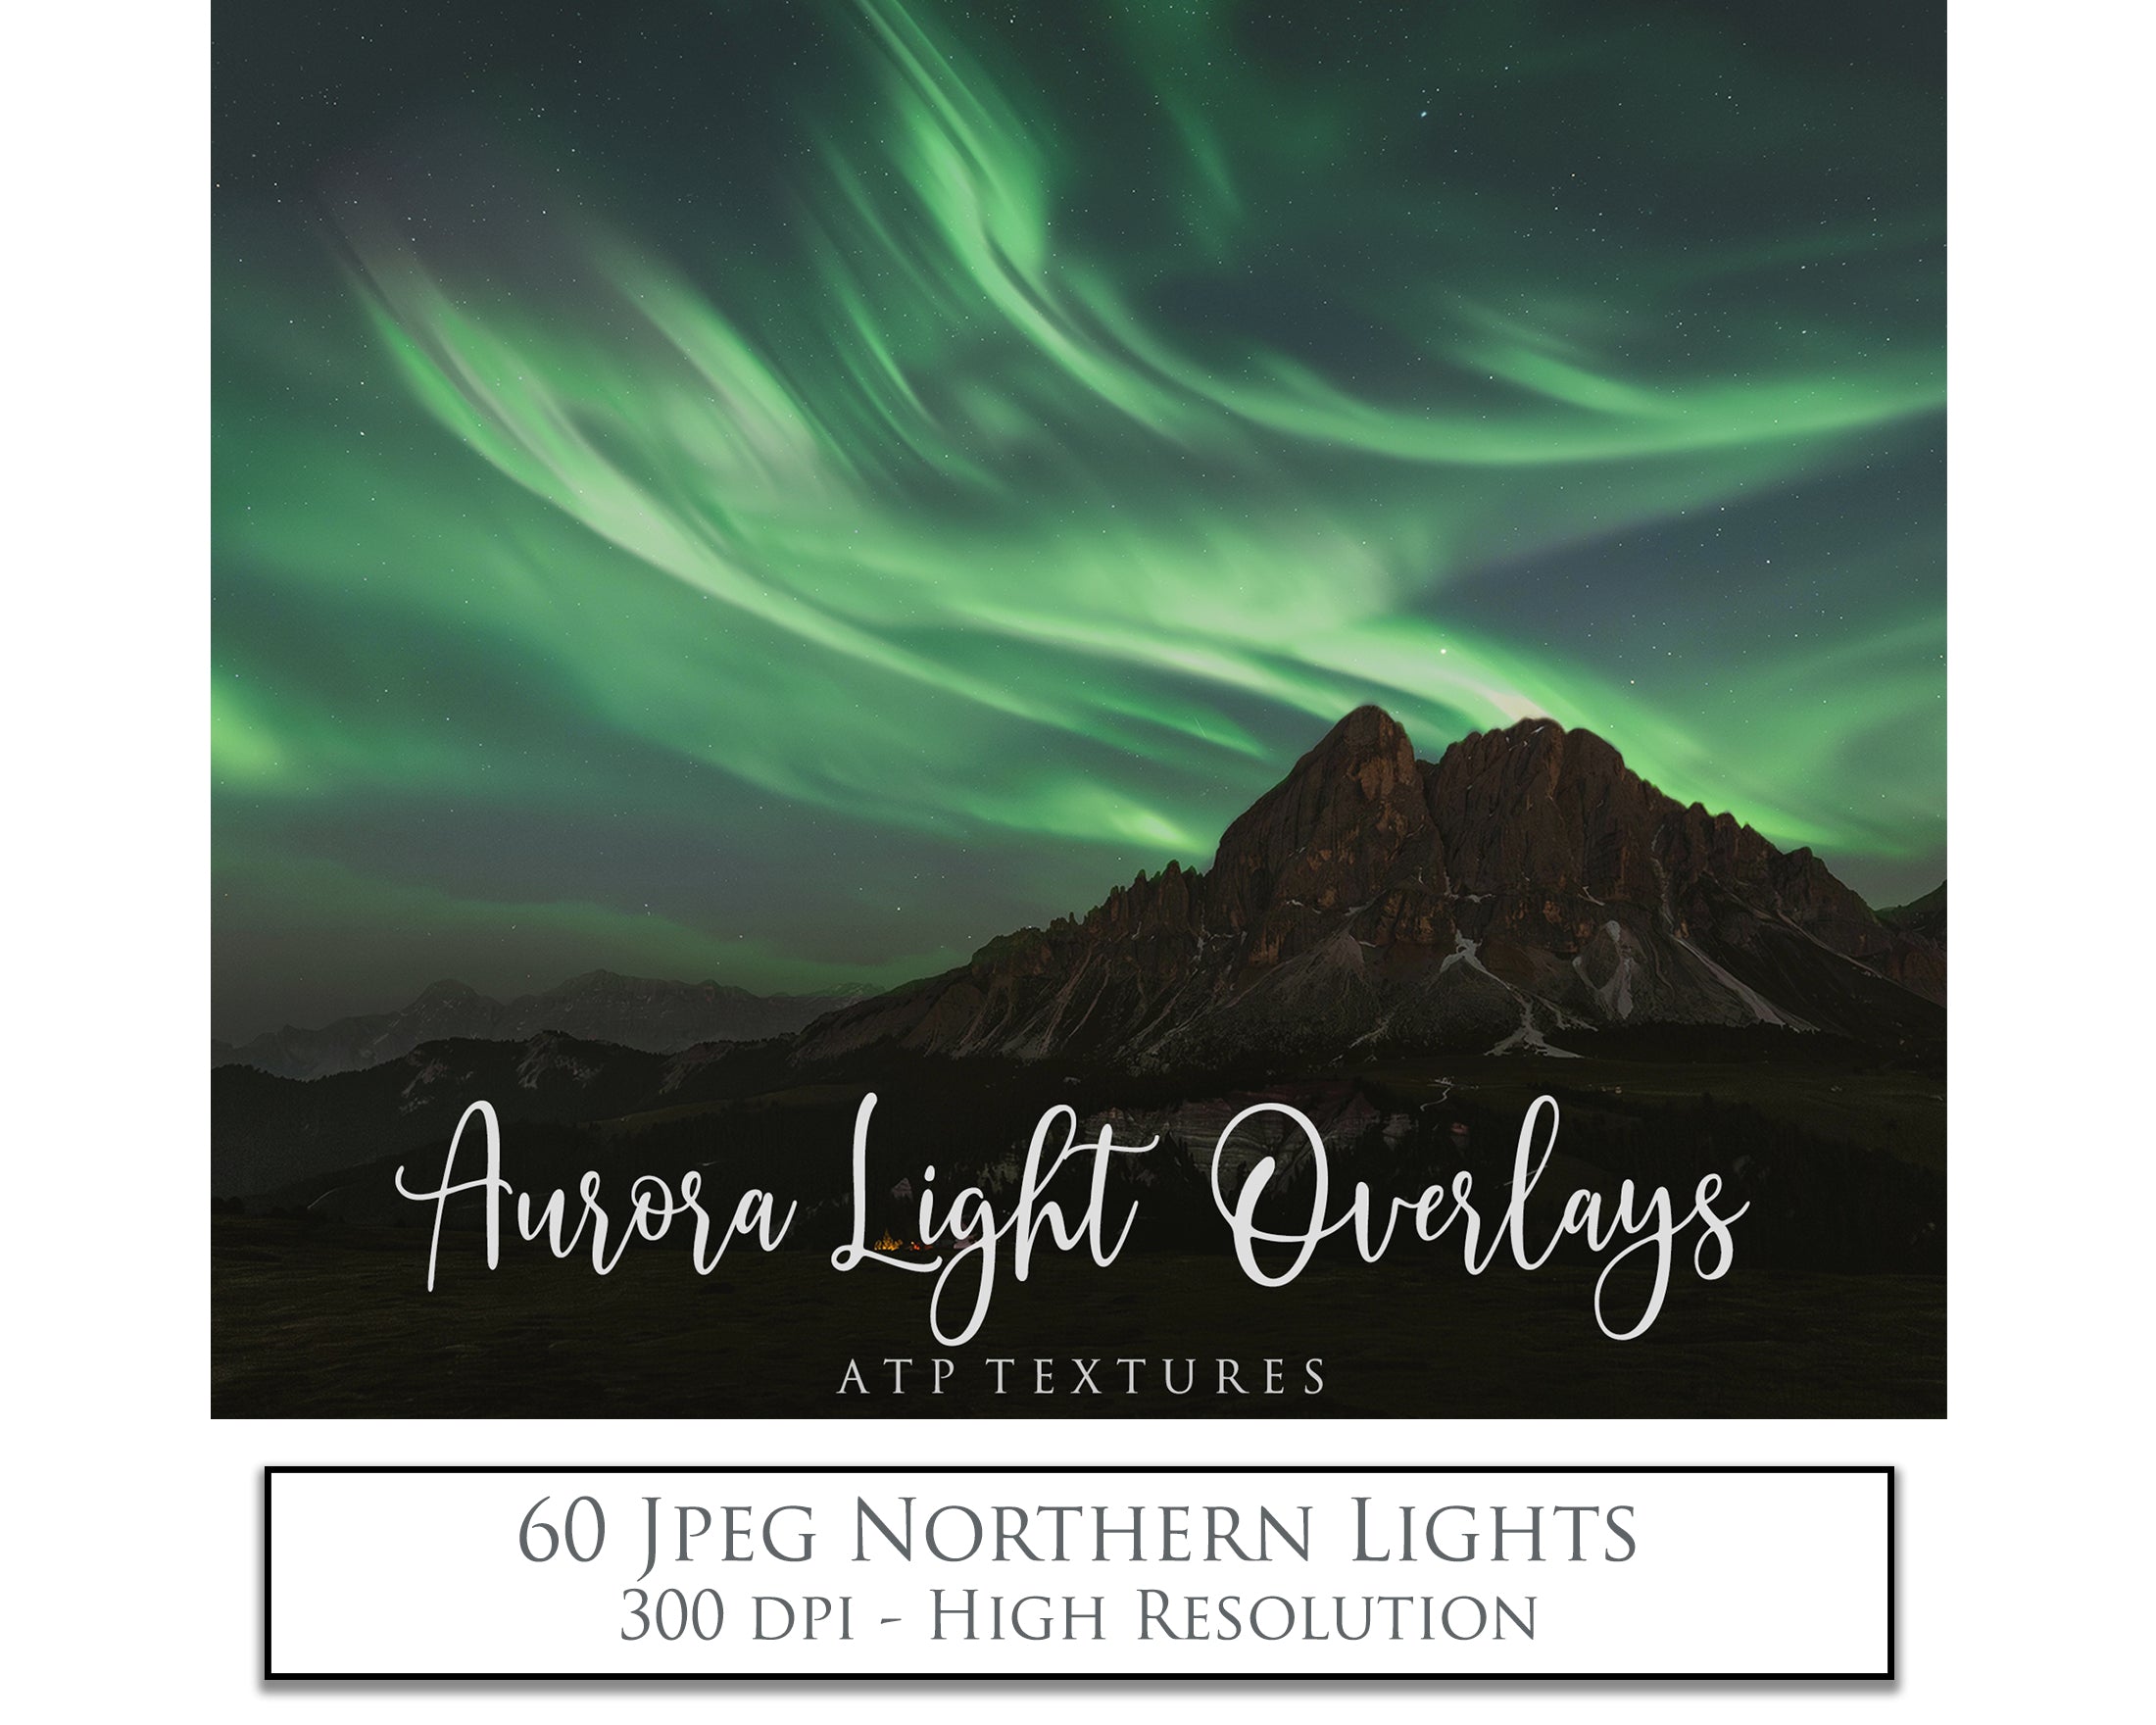 Aurora borialis / Northern Lights digital Overlays for photographers.  Photo Overlay for night photography digital editing. Photoshop screen blending modes are required for this bundle. Find more great graphic effects and assets at ATP Textures